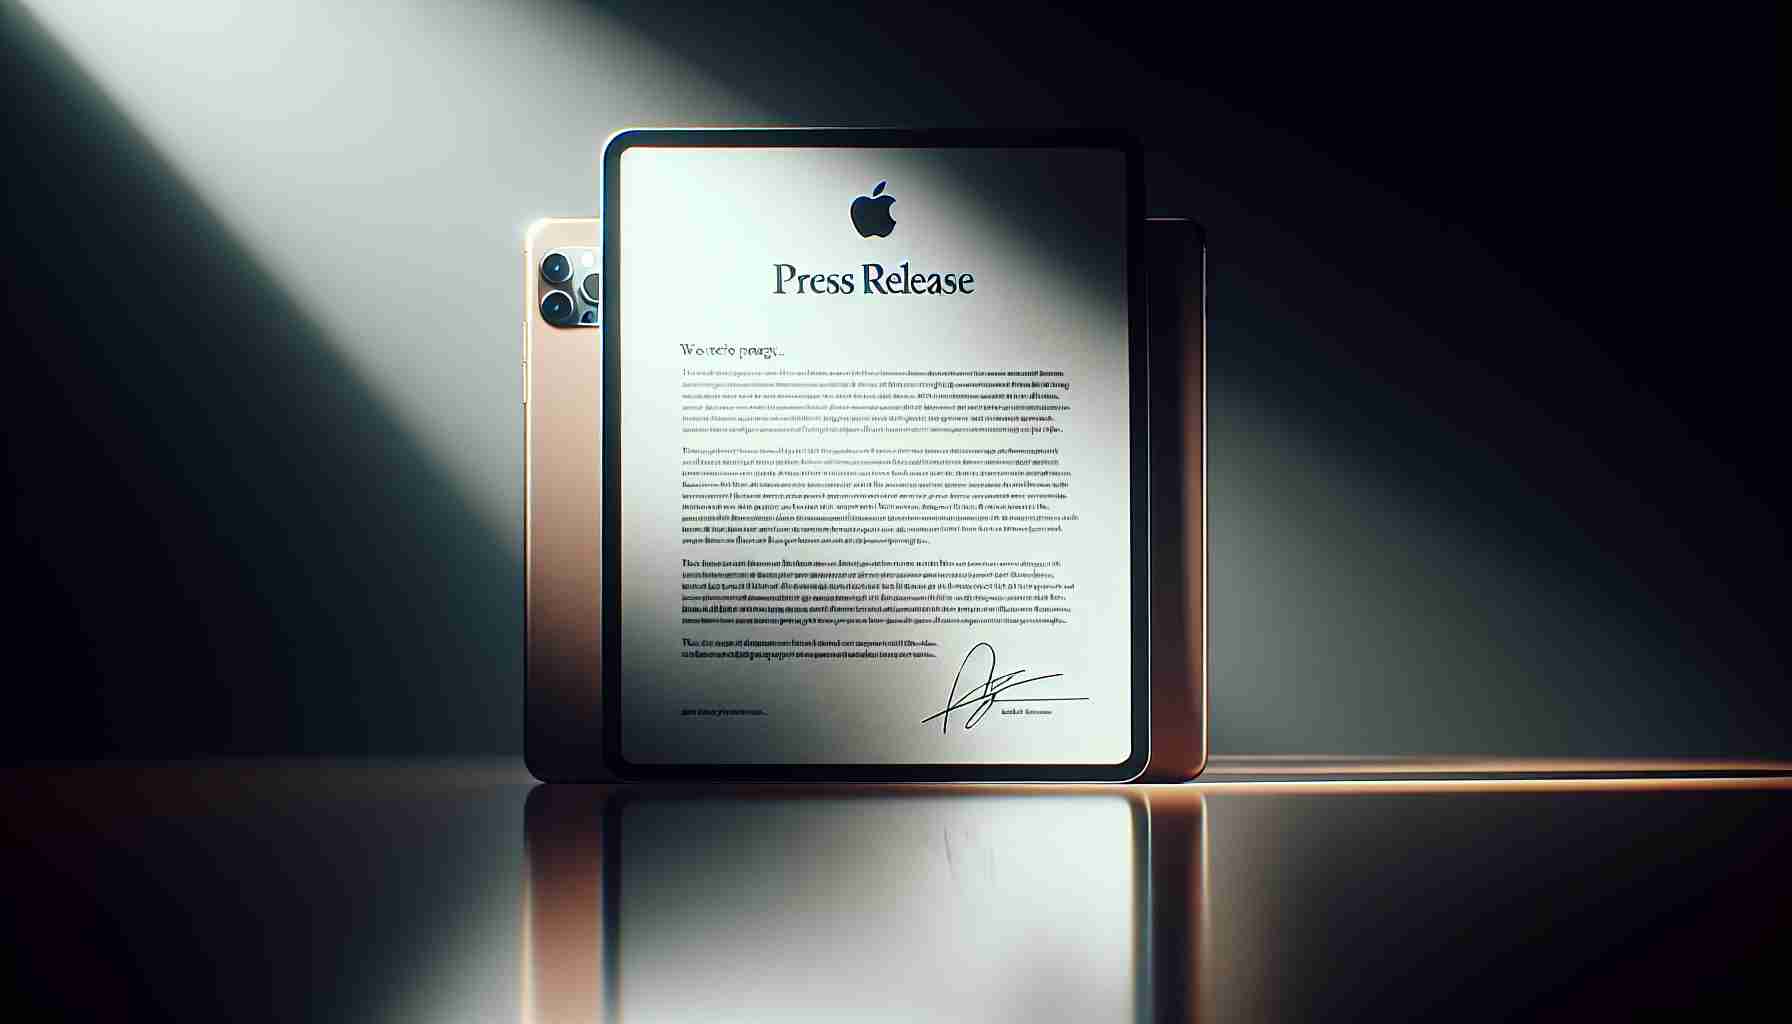 Apple Issues Apology for Controversial iPad Pro Advertisement